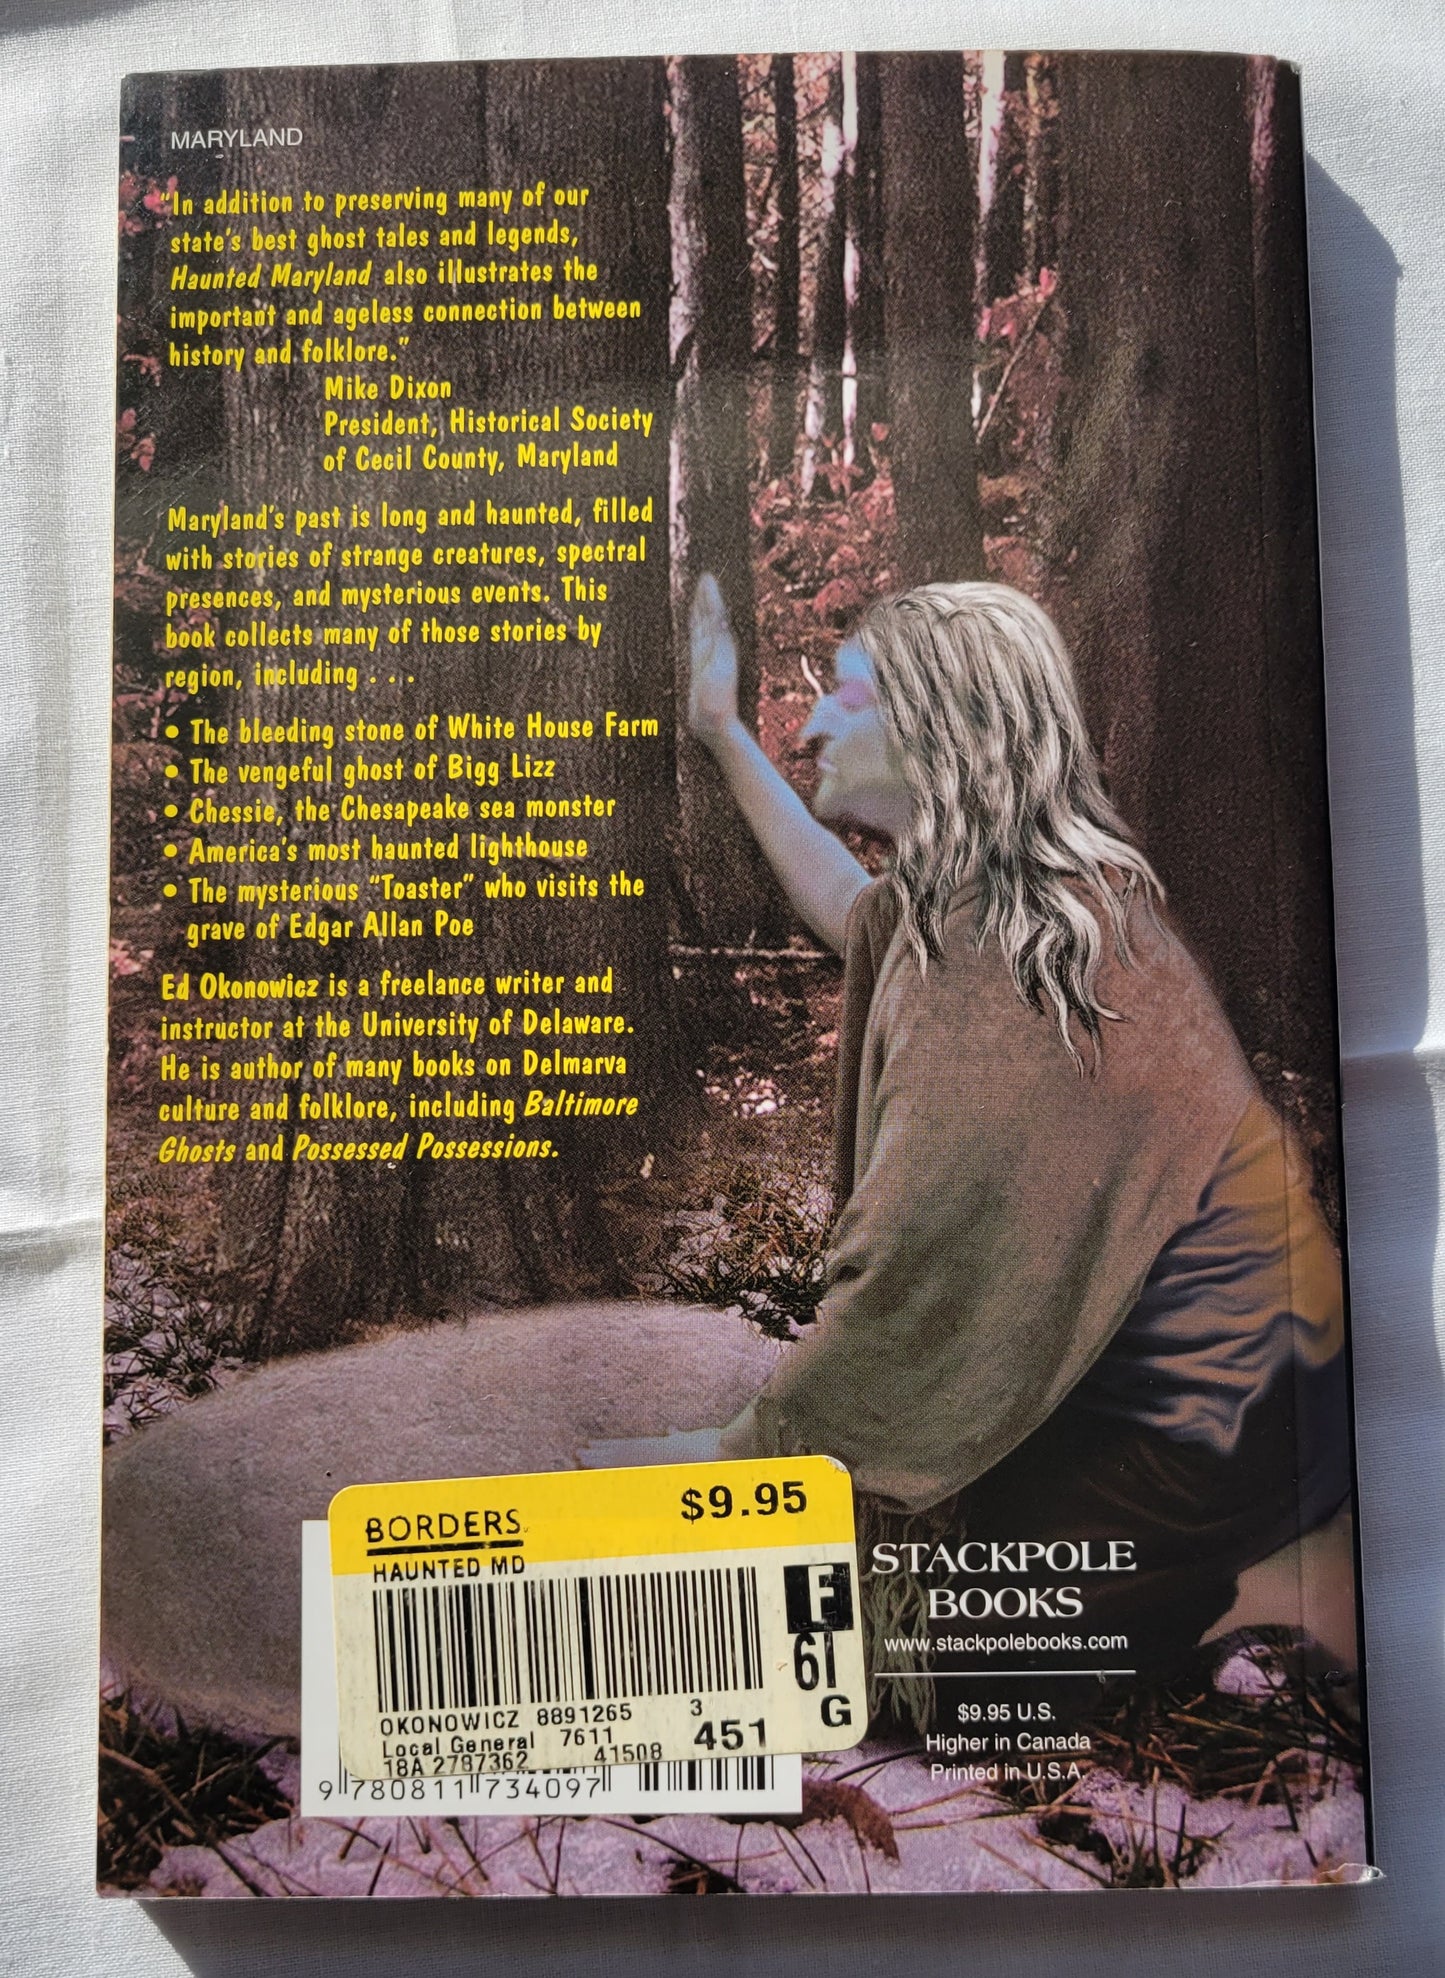 Used book for sale, "Haunted Maryland: Ghosts and Strange Phenomena of the Old Line State" by Ed Okonowicz, published by Stackpole Books. View of back cover.